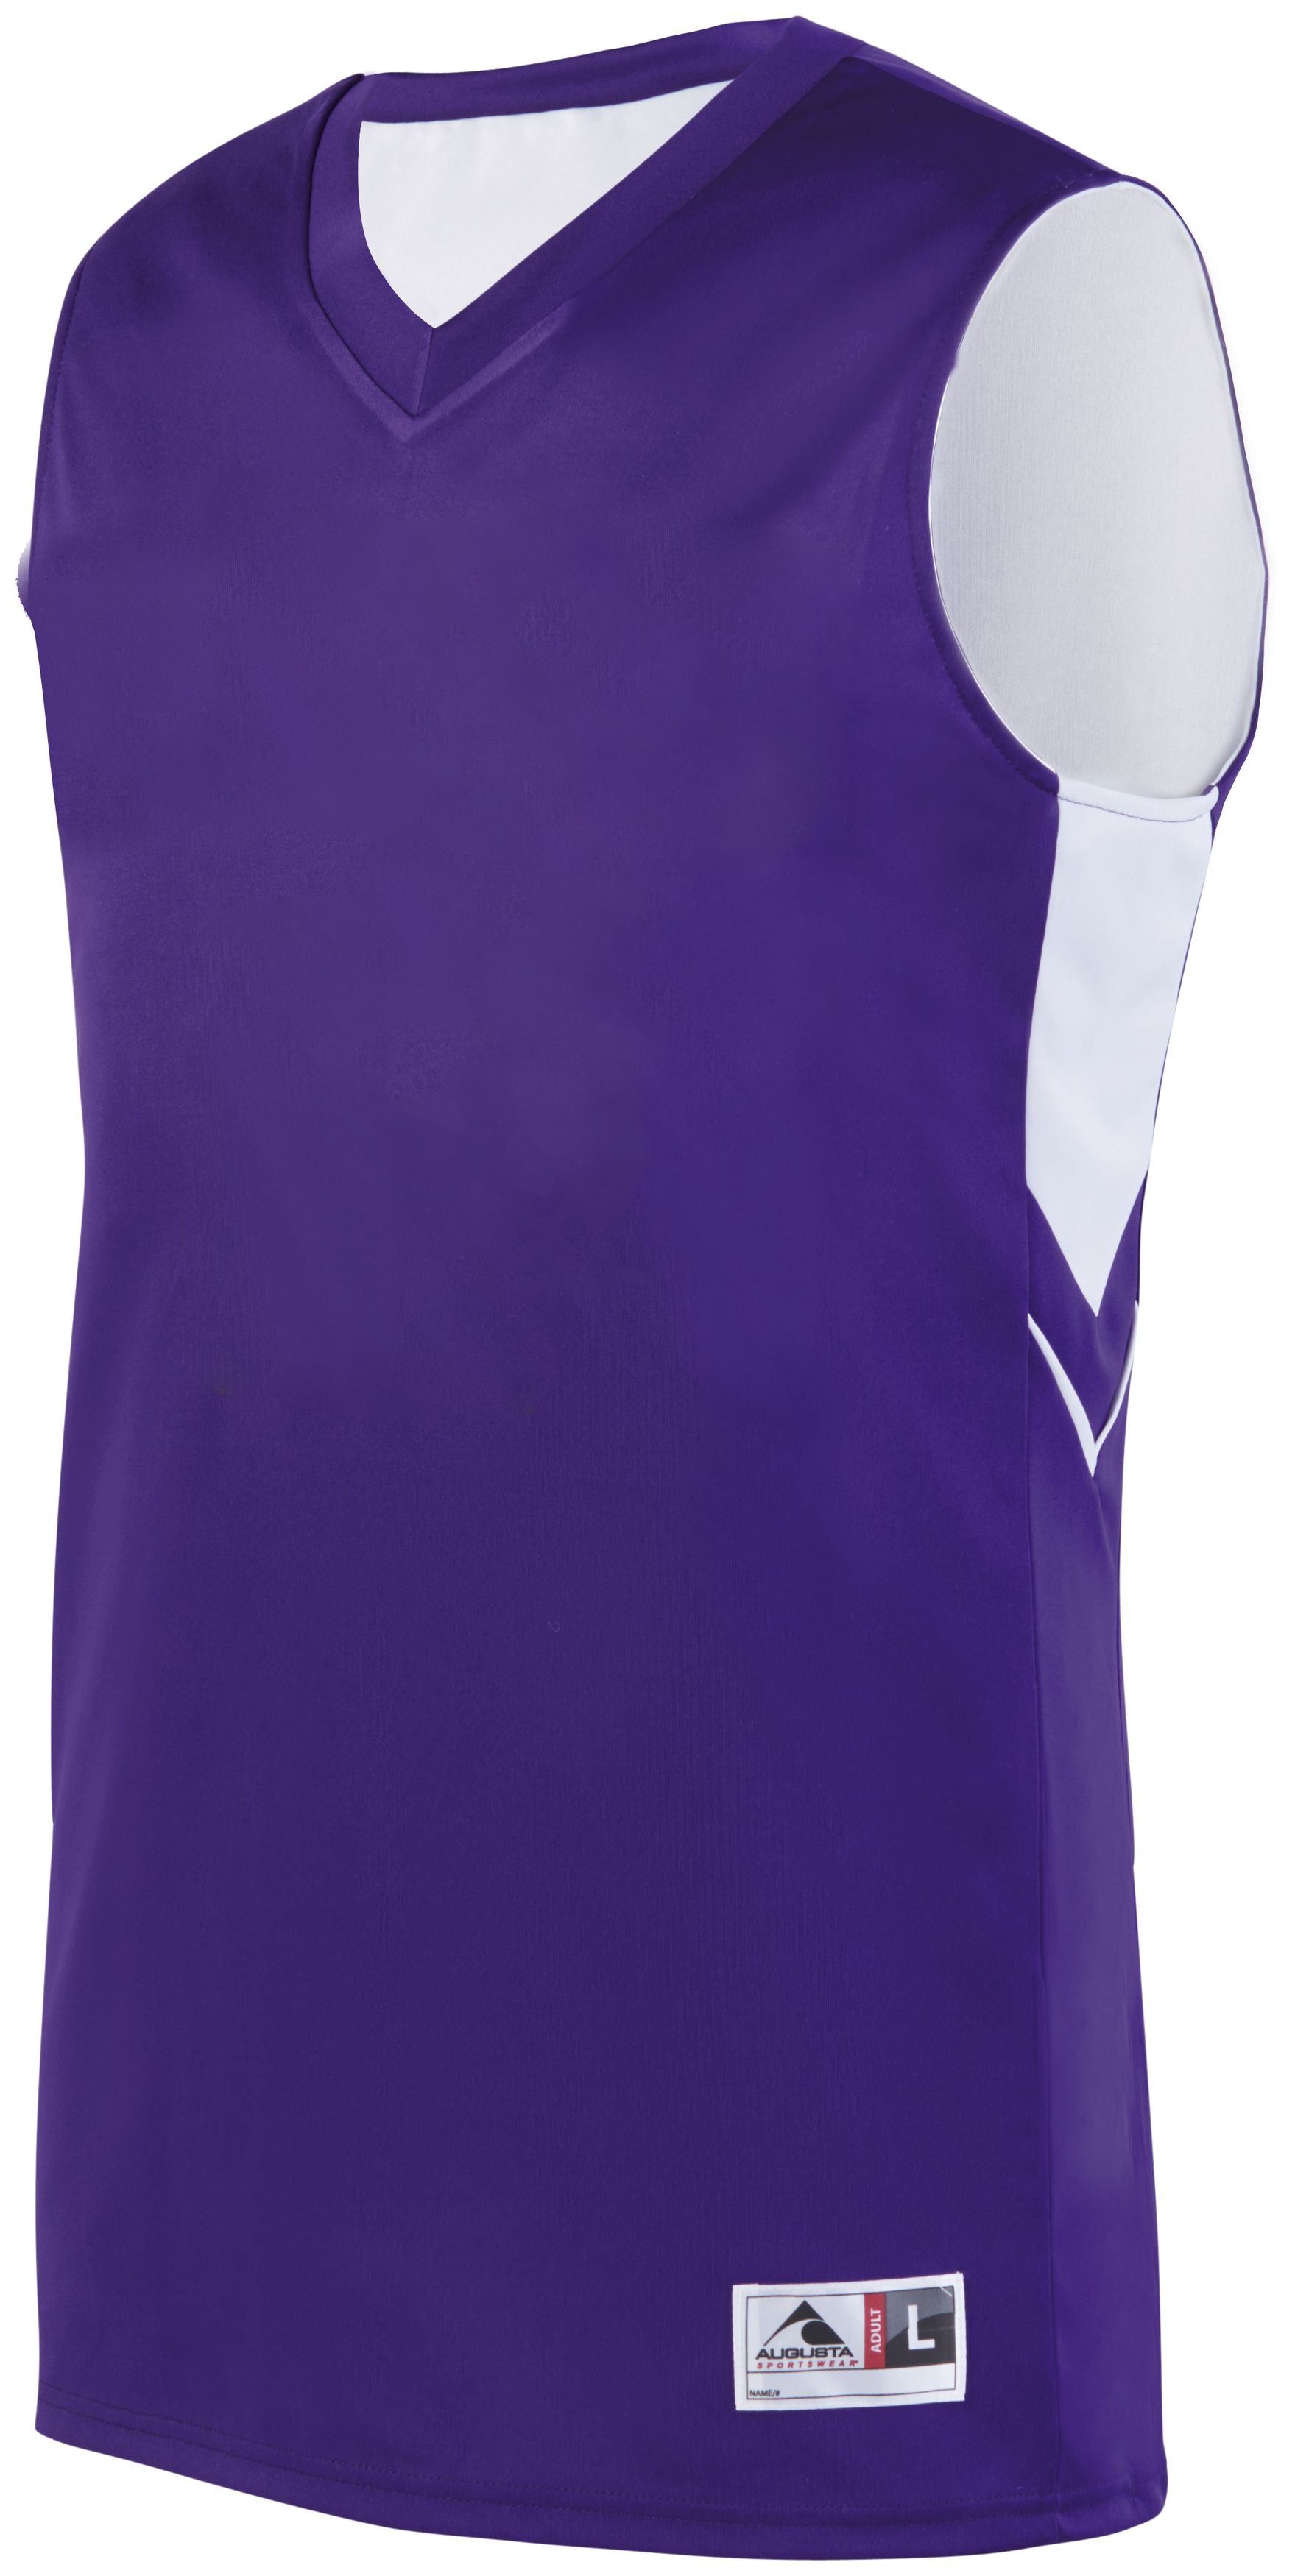 Augusta Sportswear Youth Alley-Oop Reversible Jersey in Purple/White  -Part of the Youth, Youth-Jersey, Augusta-Products, Basketball, Shirts, All-Sports, All-Sports-1 product lines at KanaleyCreations.com